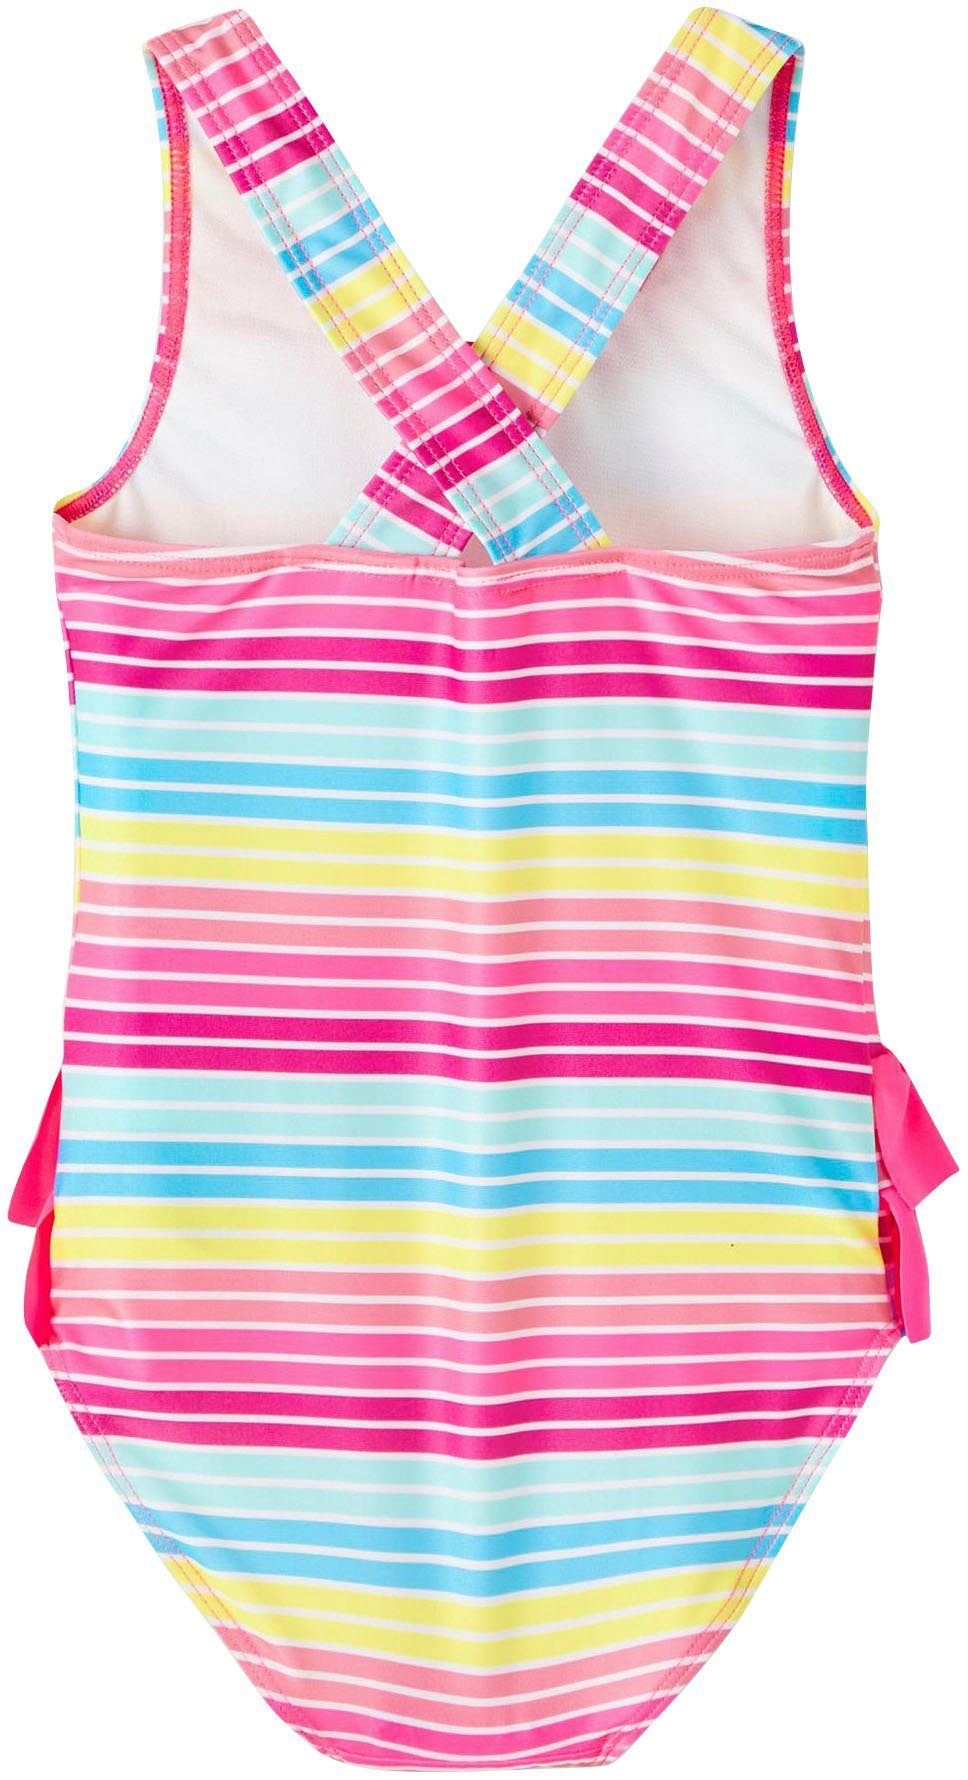 CPLG PEPPAPIG NMFMULLE Badeanzug SWIMSUIT It Name